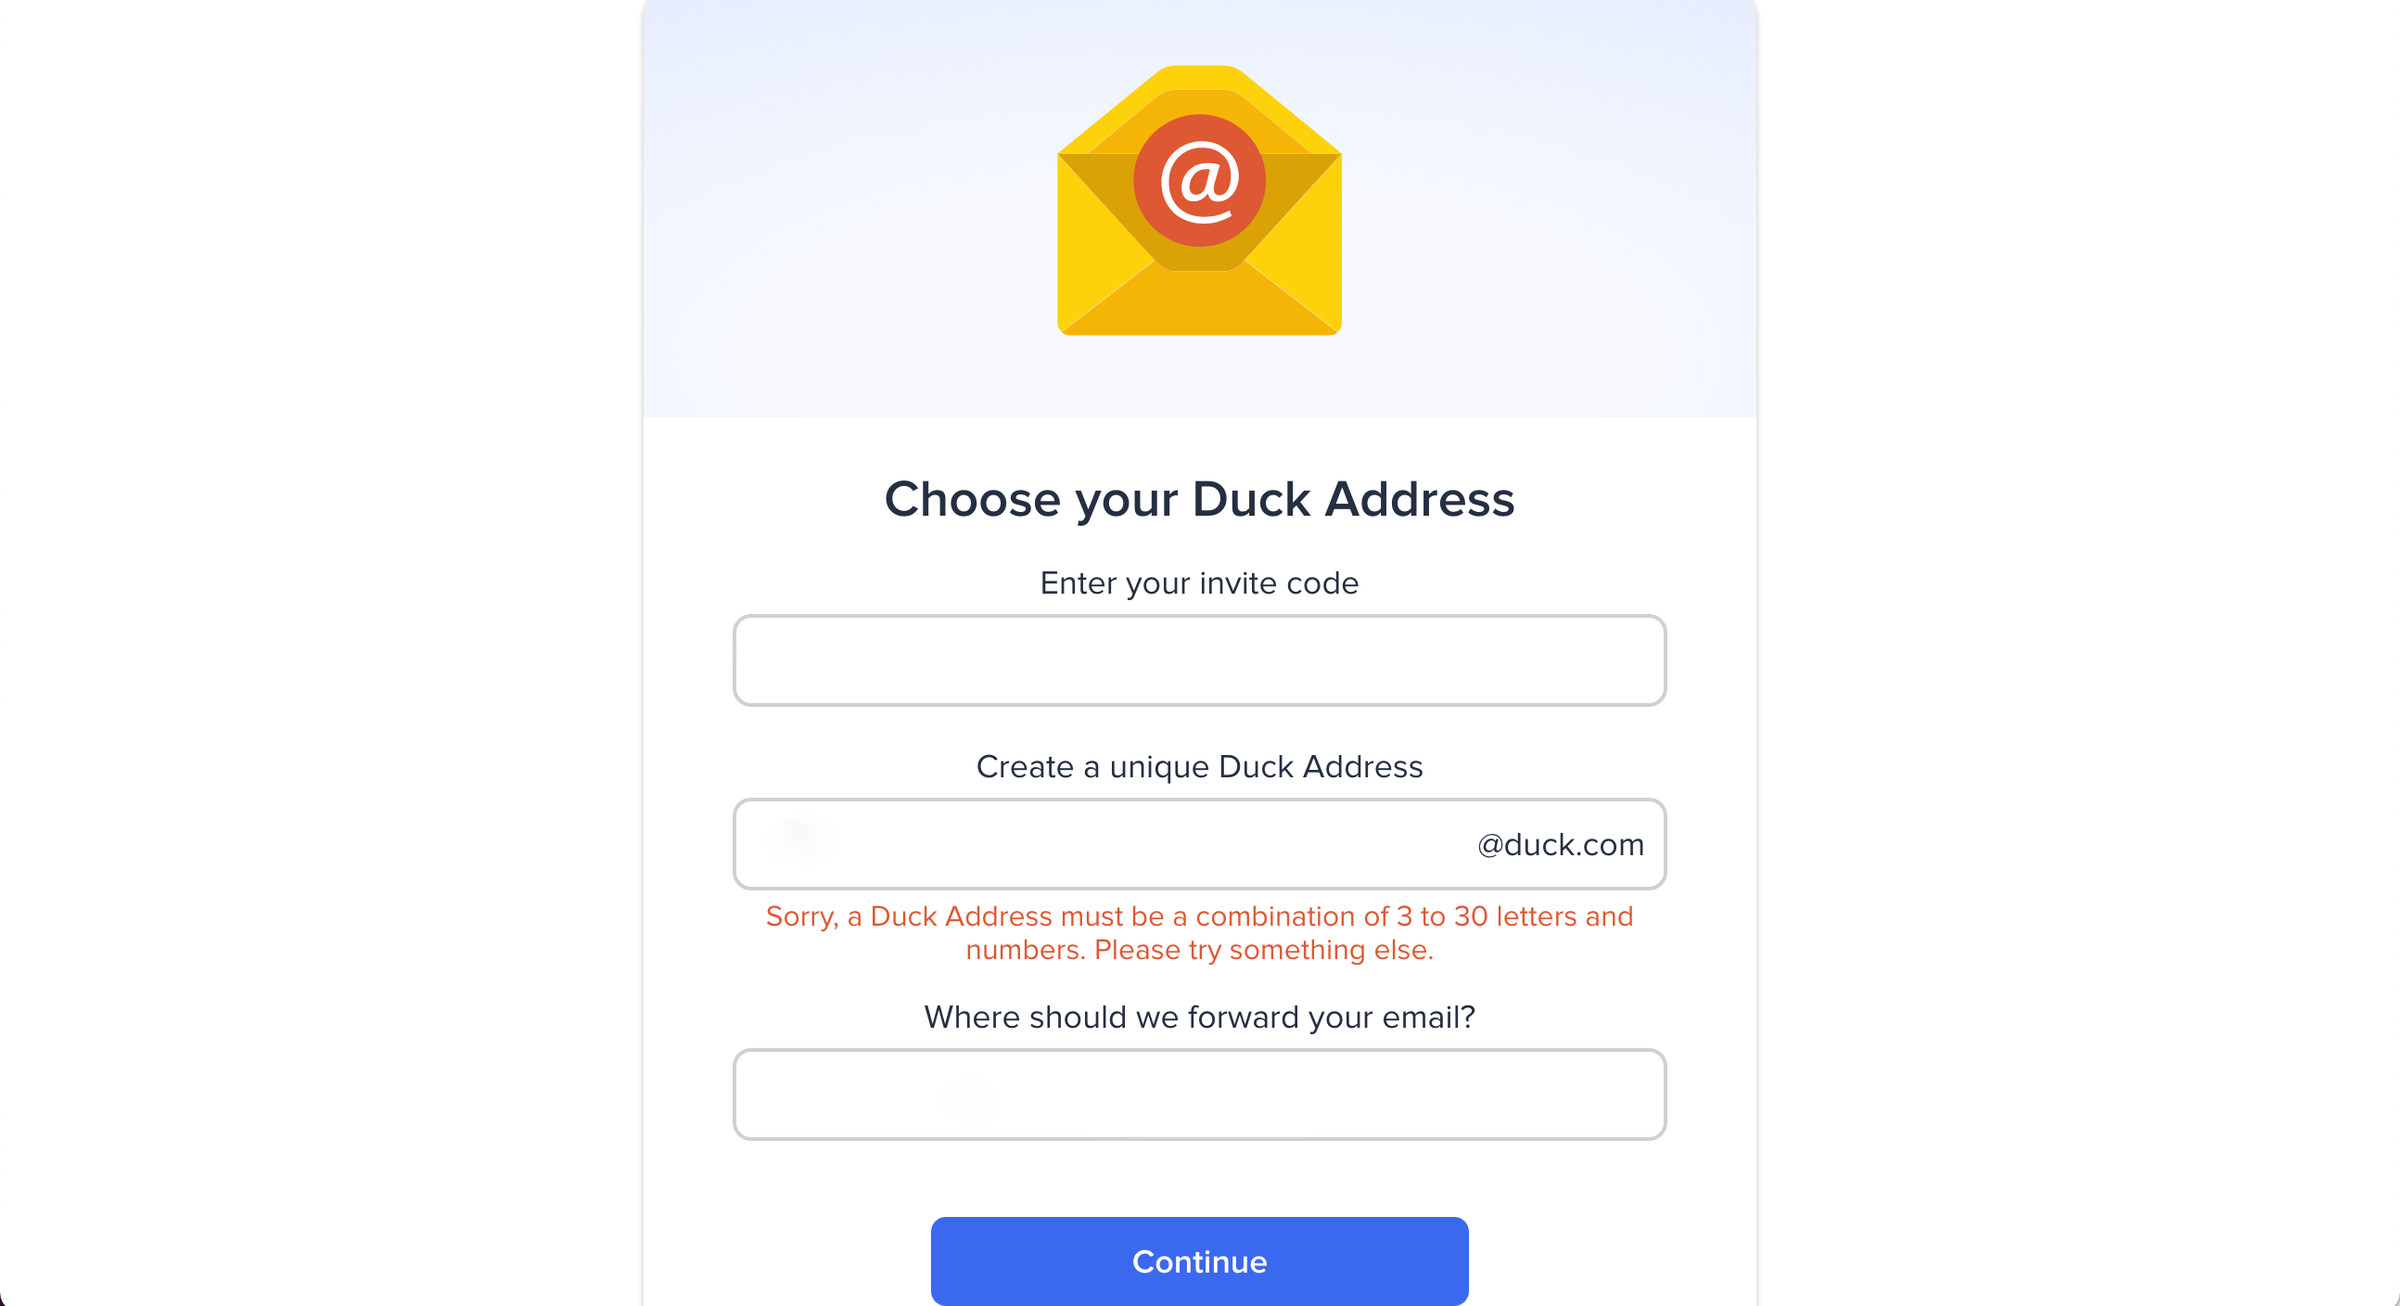 DuckDuckGo Email Protection gives you an extra email address to use to avoid trackers.